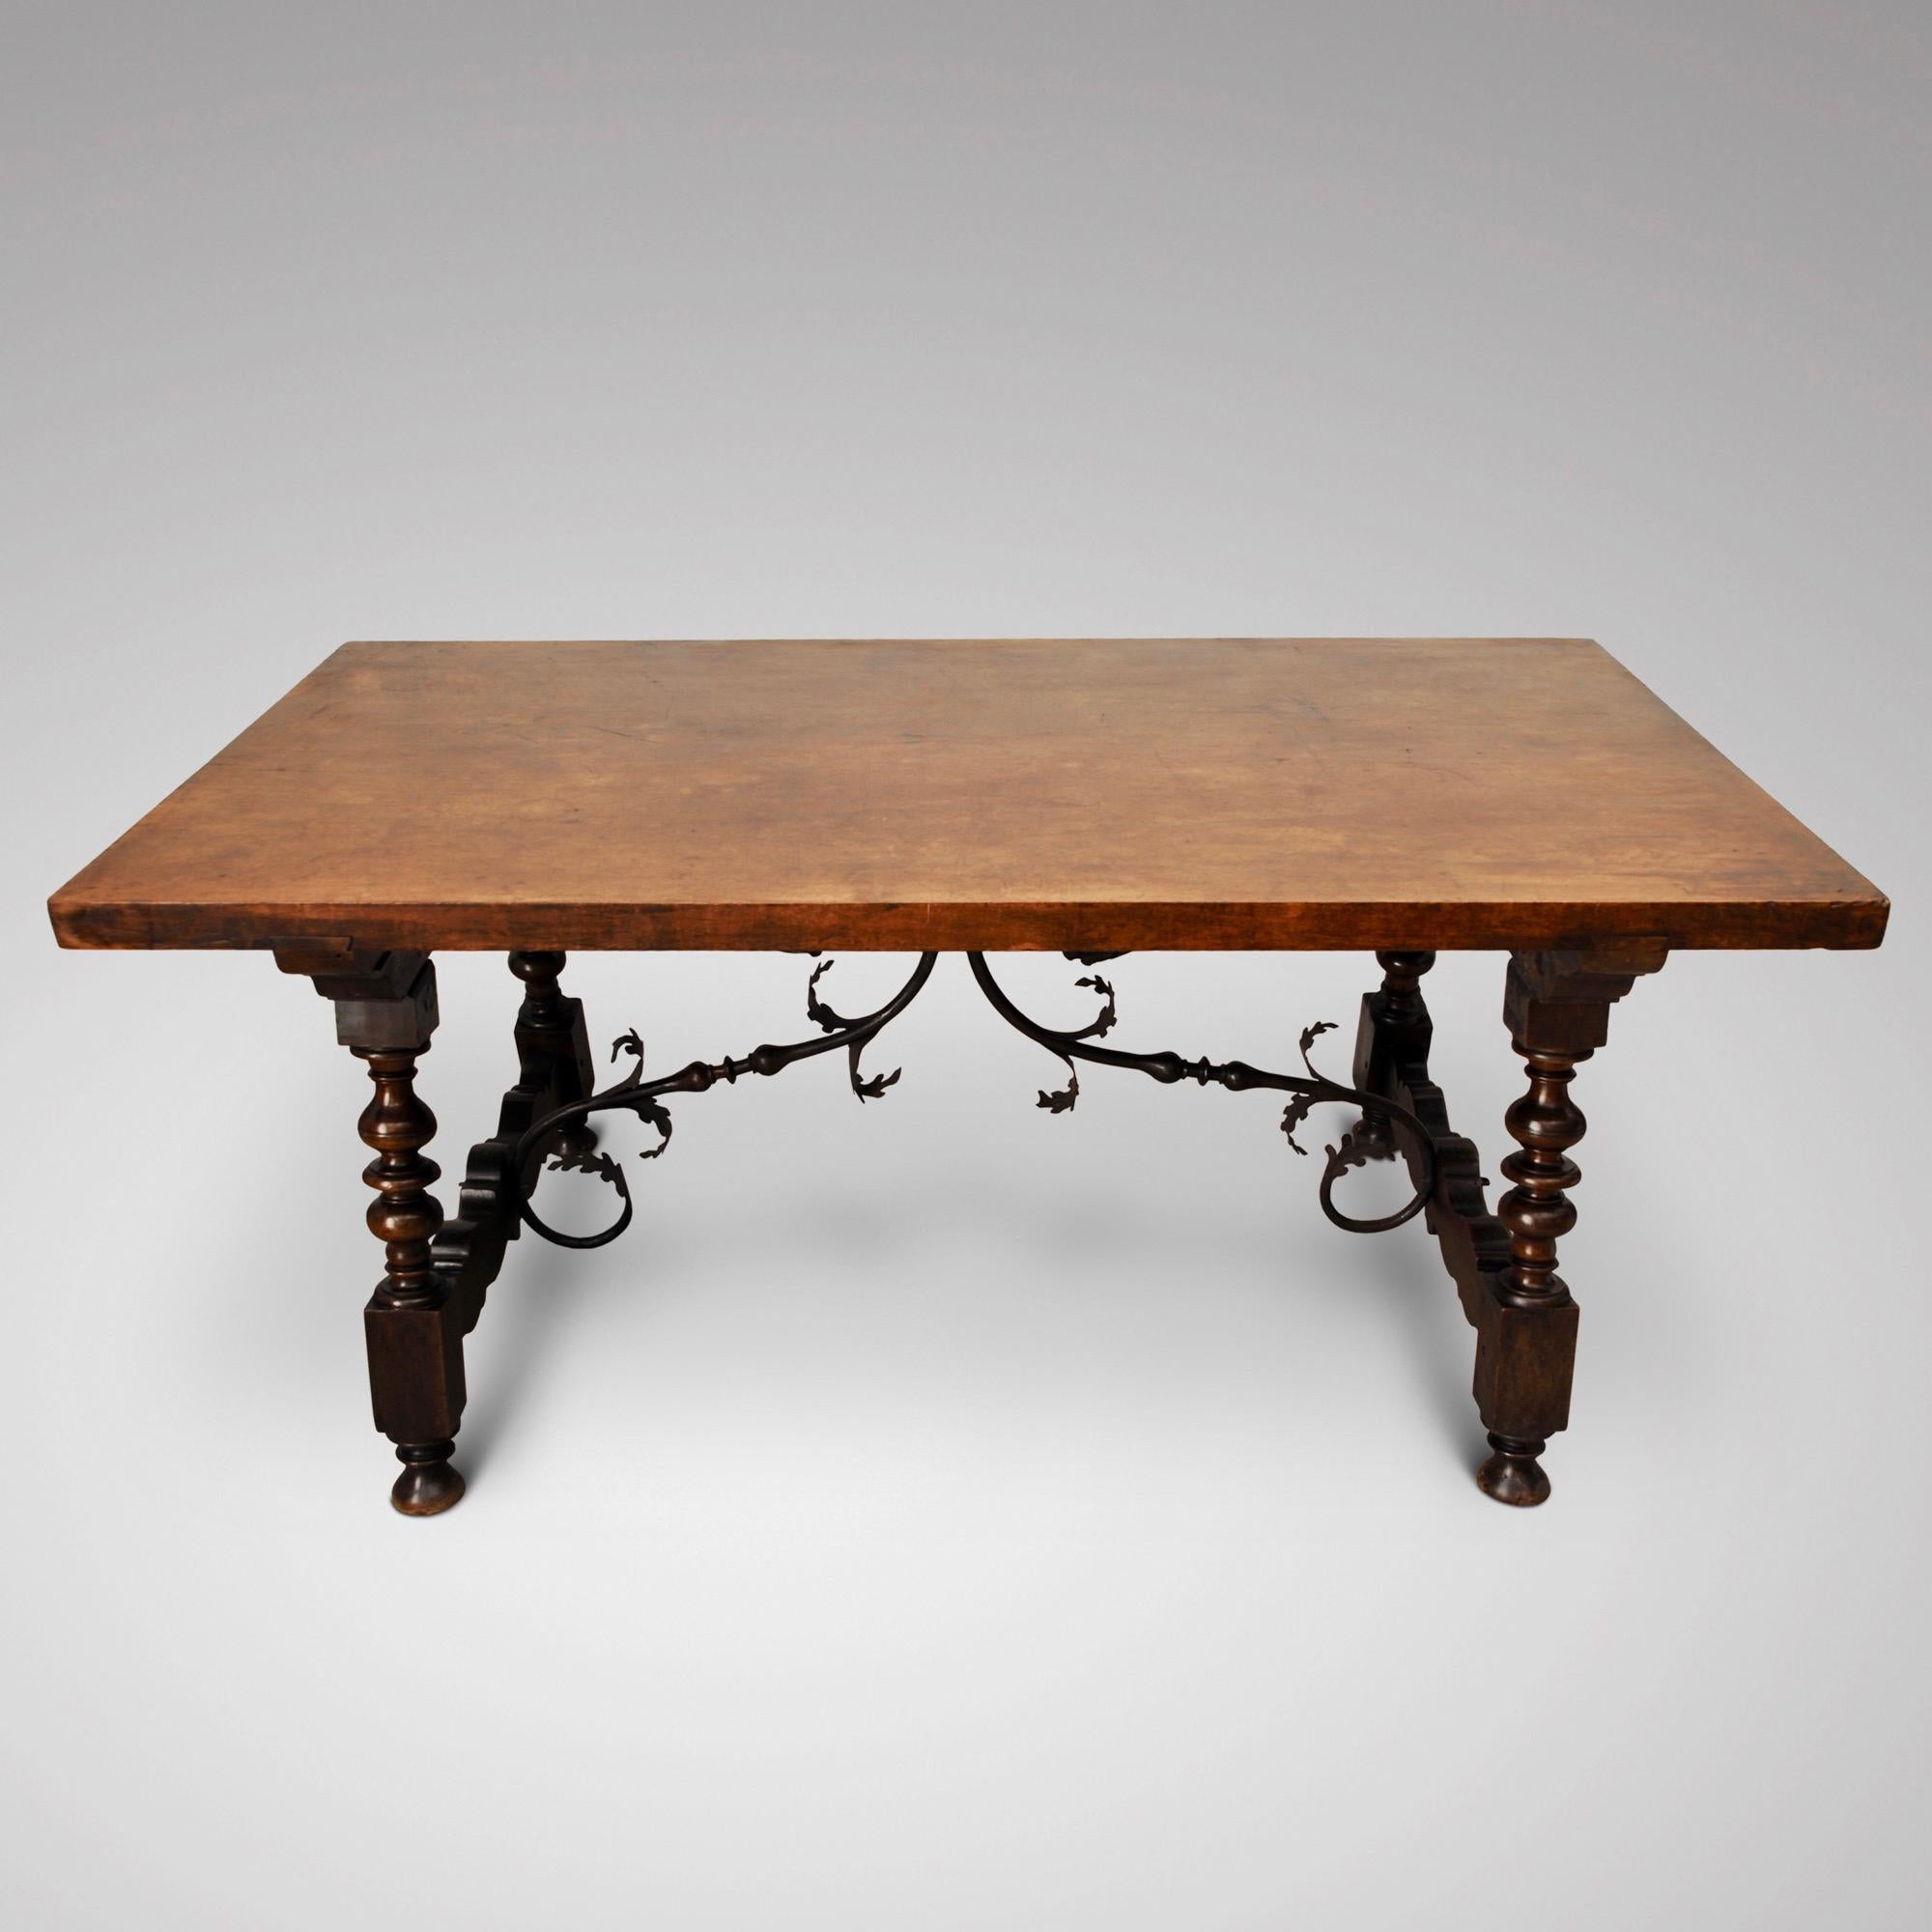 A wonderful Spanish walnut table of large scale with a thick one plank top of superb colour. The table retains the fantastic original metal work and could stand well as either a side table or centre table.